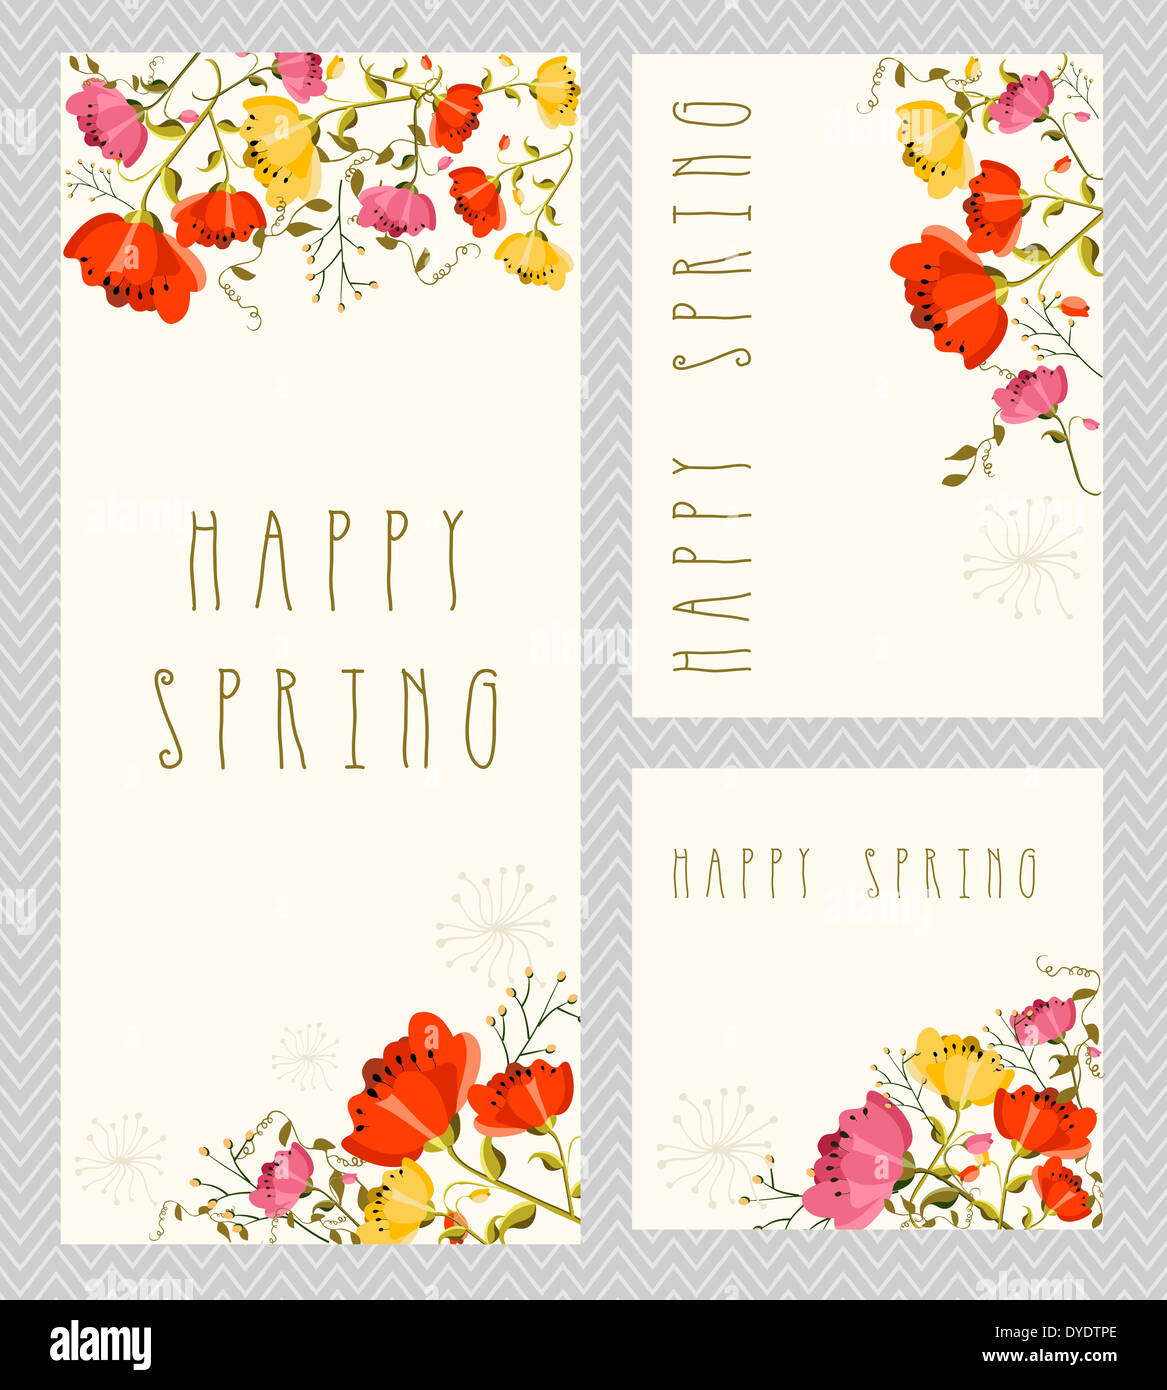 Spring illustration design with nature decoration, flowers and more in colorful style. EPS10 vector Stock Photo